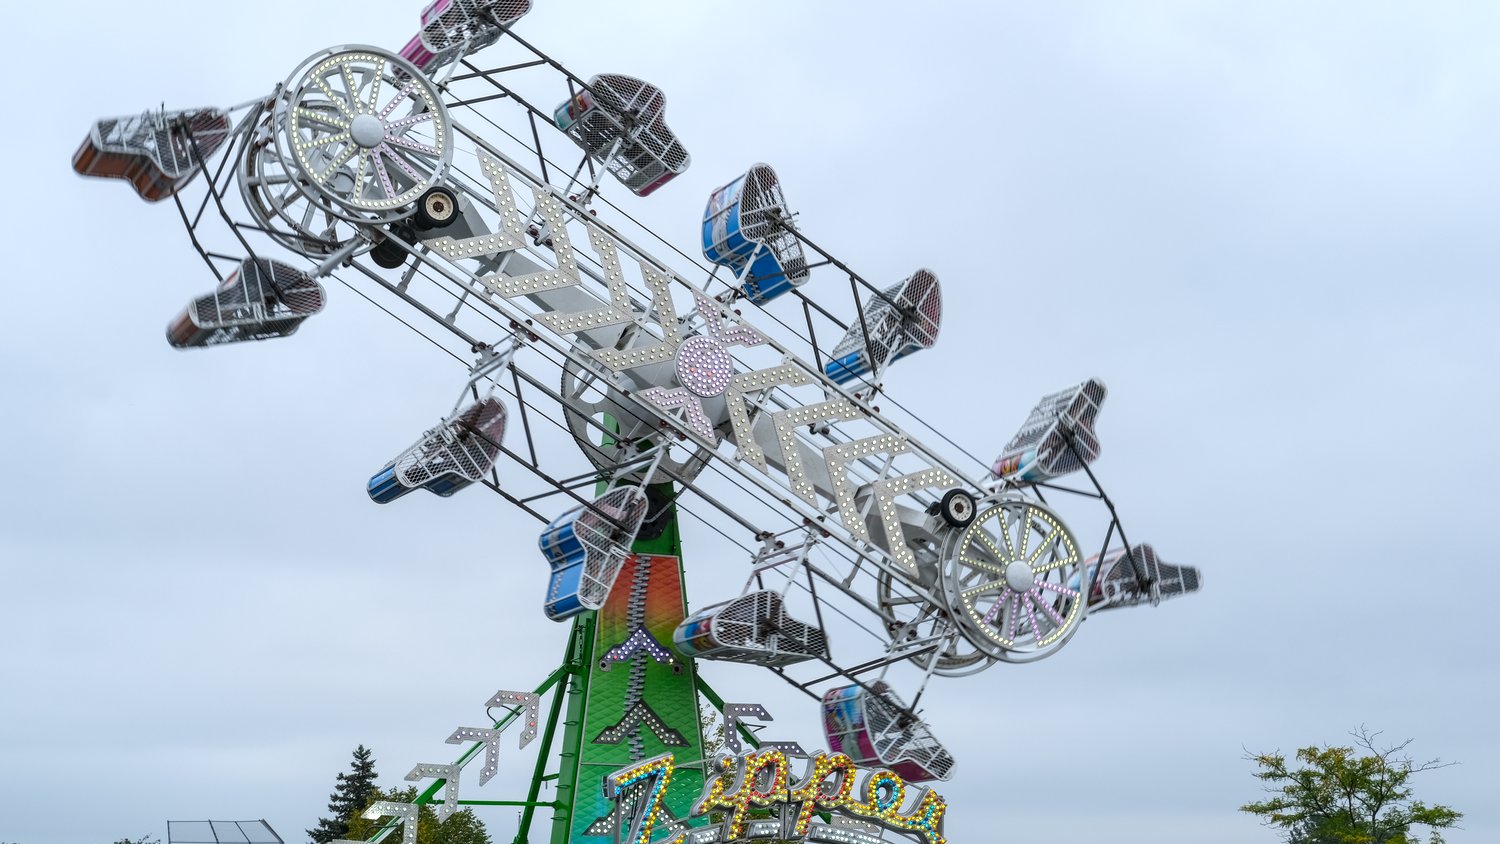 Zipper ride, spinning around in the air.